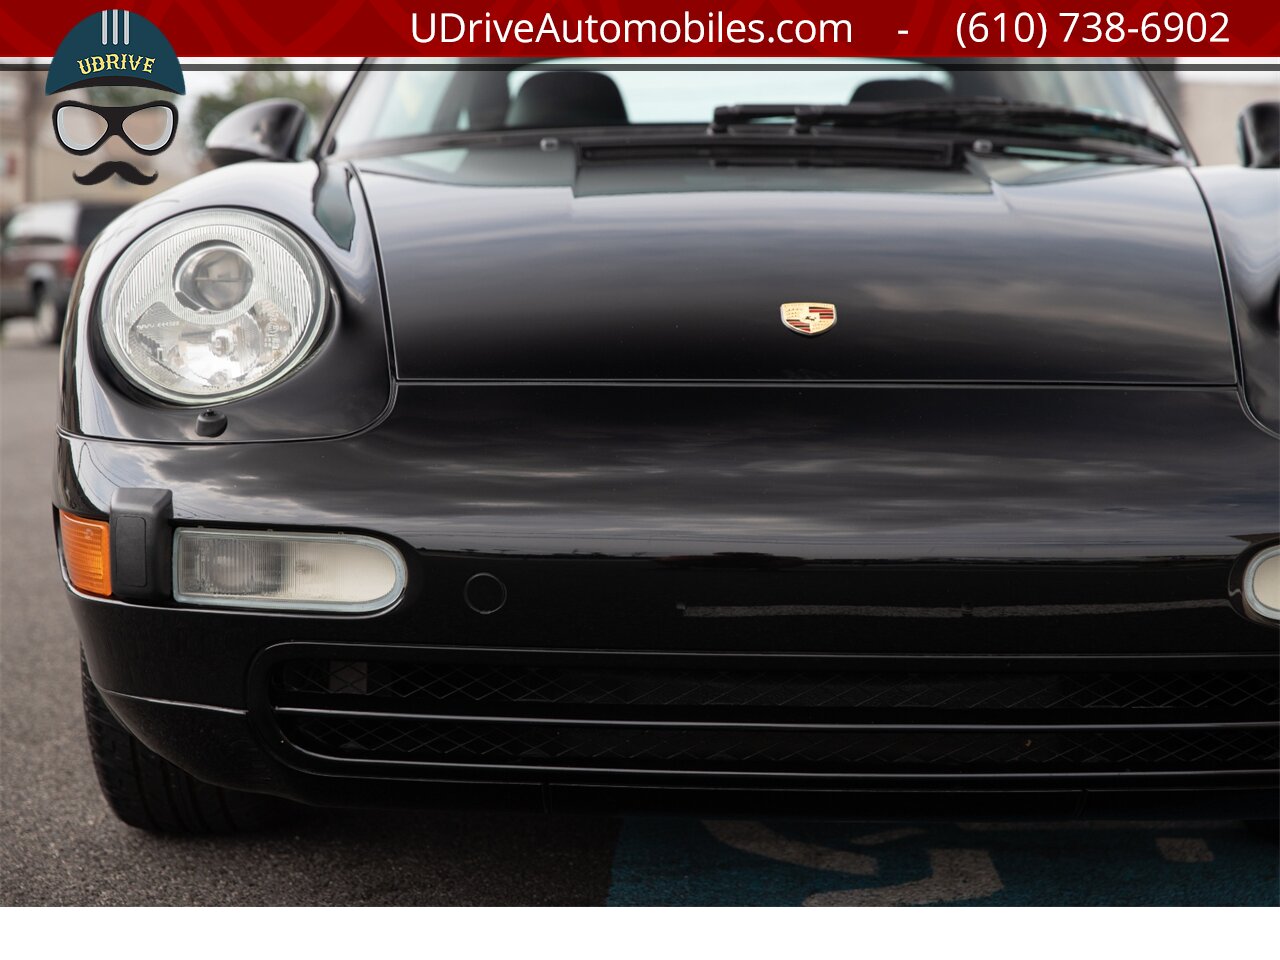 1995 Porsche 911 993 Carrera 6 Speed 16k Miles Service History  Black over Black Spectacular Stock Example 1 Owner Clean Carfax - Photo 12 - West Chester, PA 19382